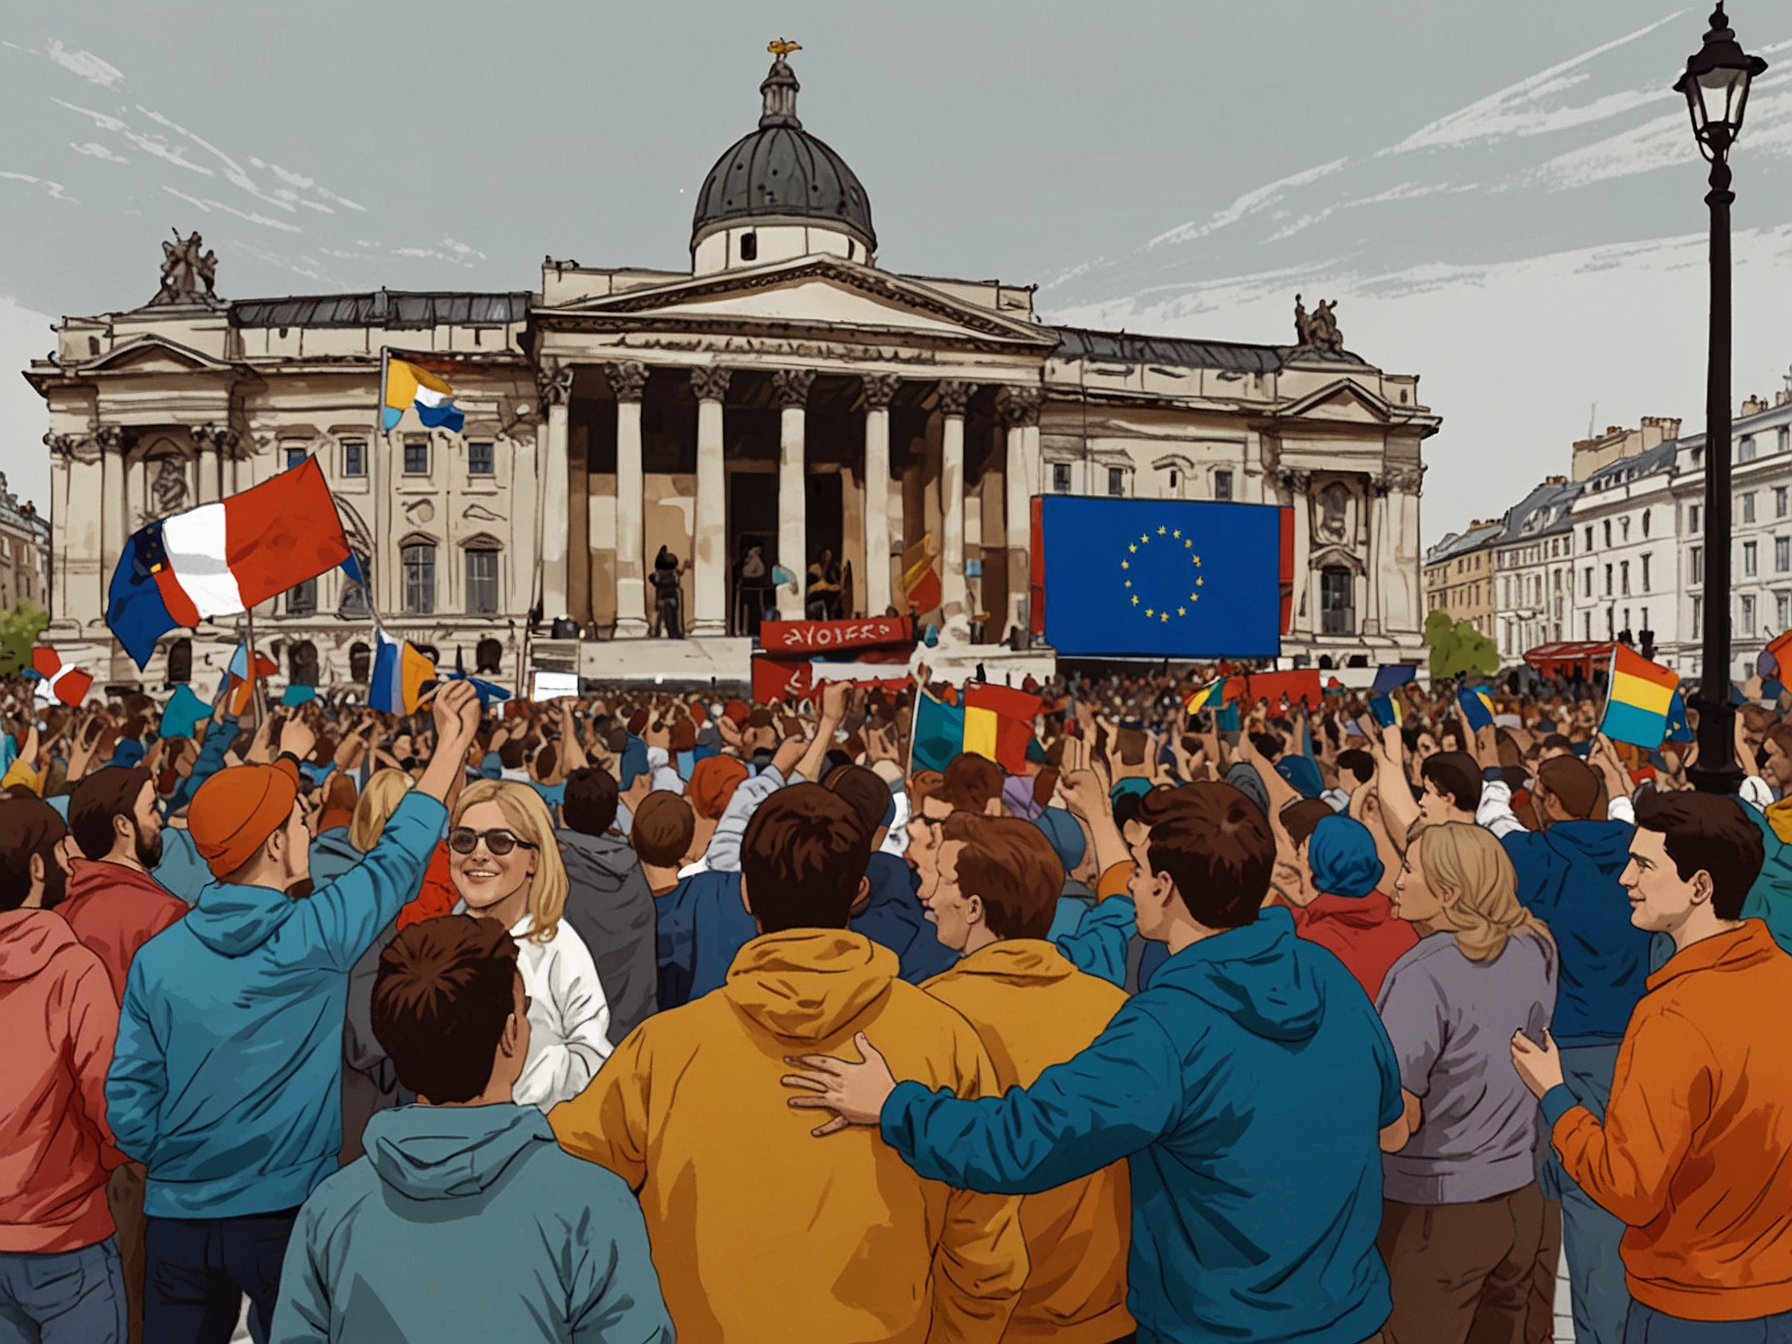 A vibrant crowd gathers at Trafalgar Square, with large screens showing a live Euros match. The atmosphere is electric, filled with fans displaying team colors and flags, experiencing the communal thrill of sports.